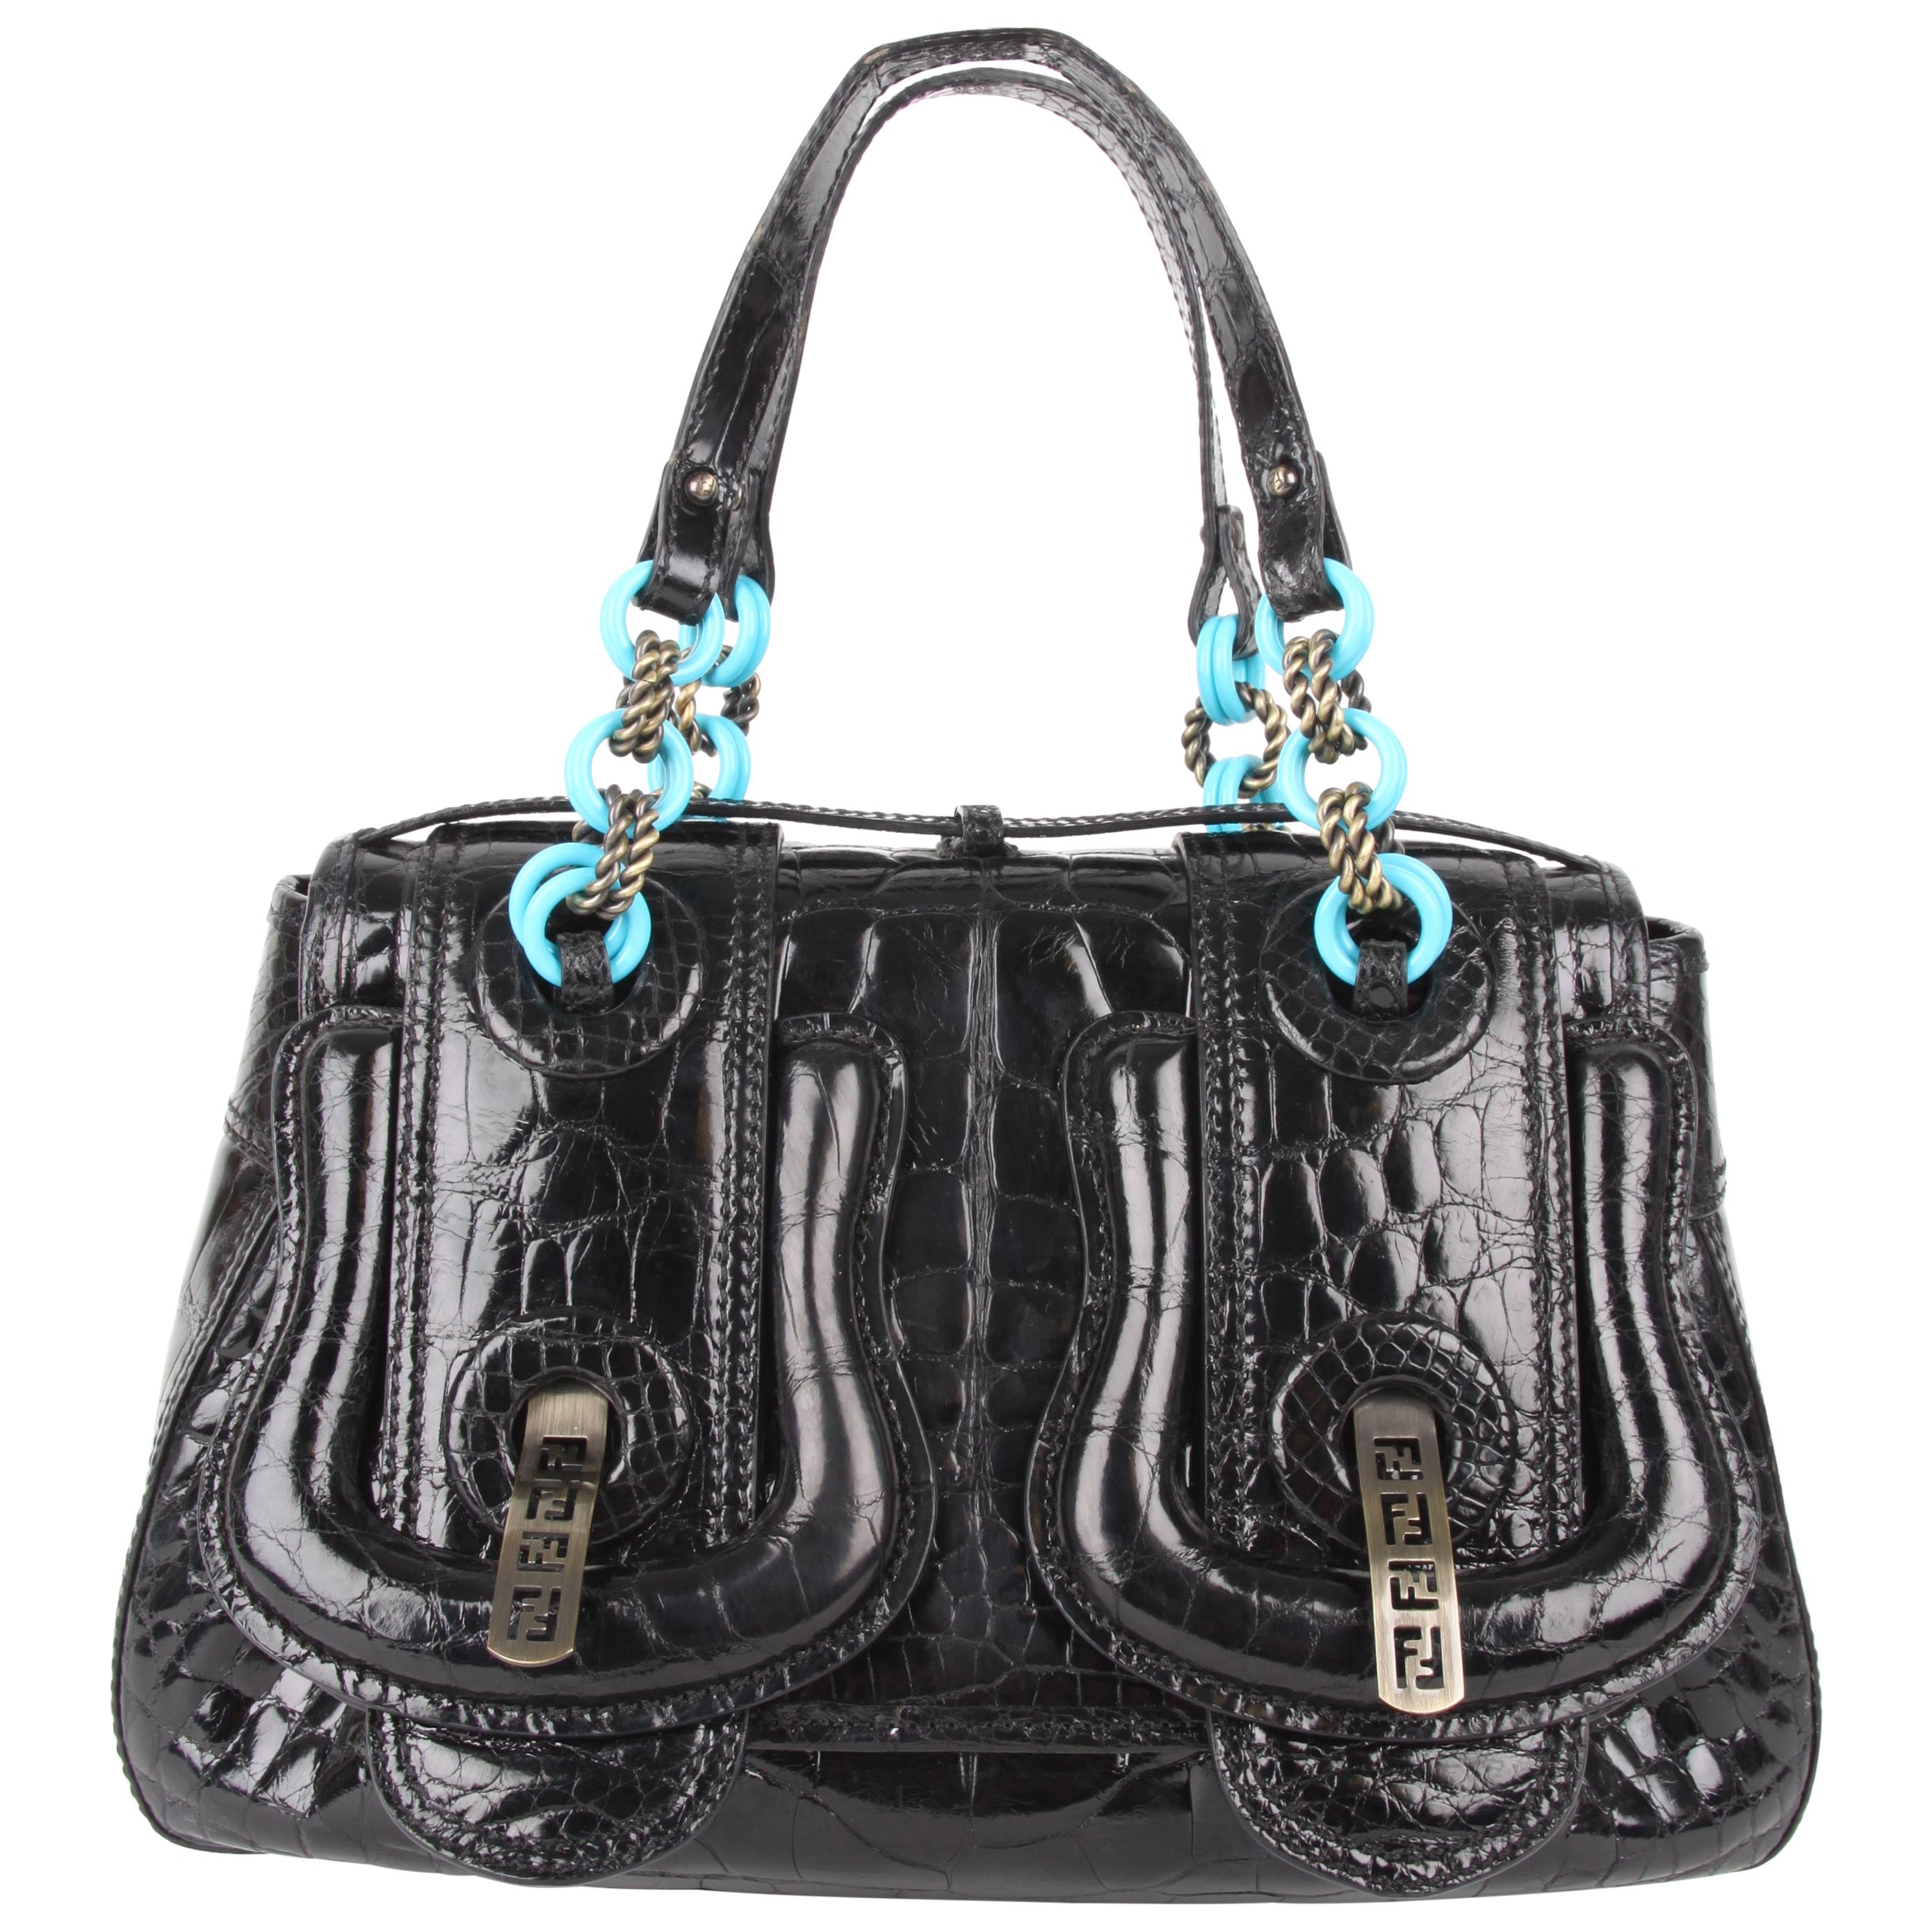   Fendi S/S 2006 Black  Leather B-Bag With Turquoise Chain Straps  For Sale